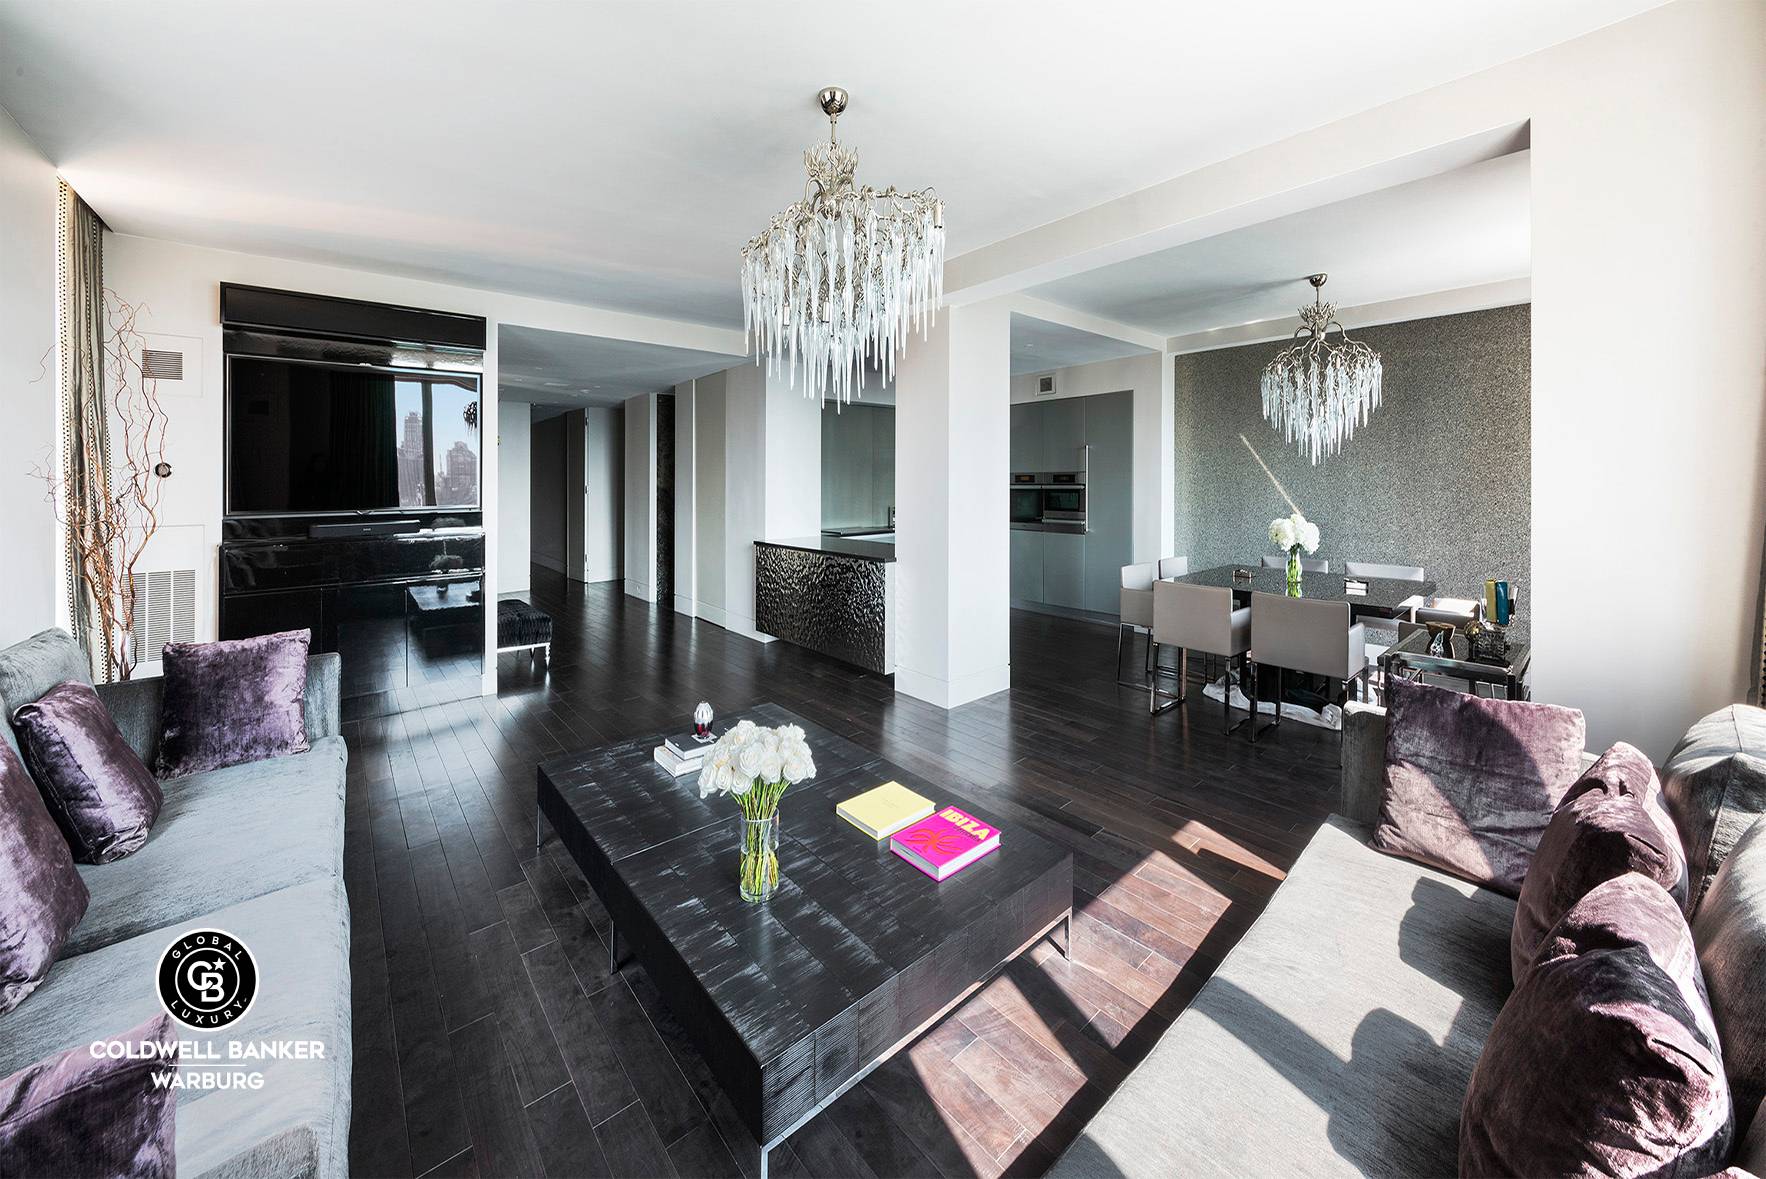 Central Park views and brilliant light define this sensational 2, 907 square foot, 4 bedroom, 4.